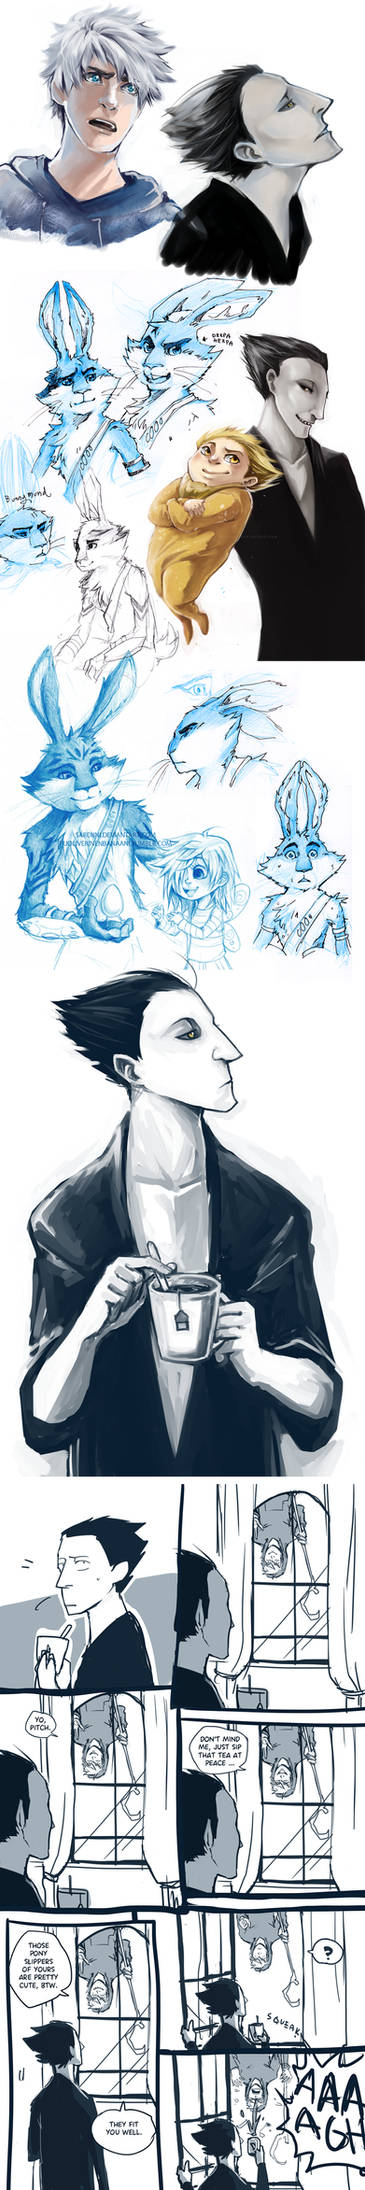 ROTG doodles and sketches 02